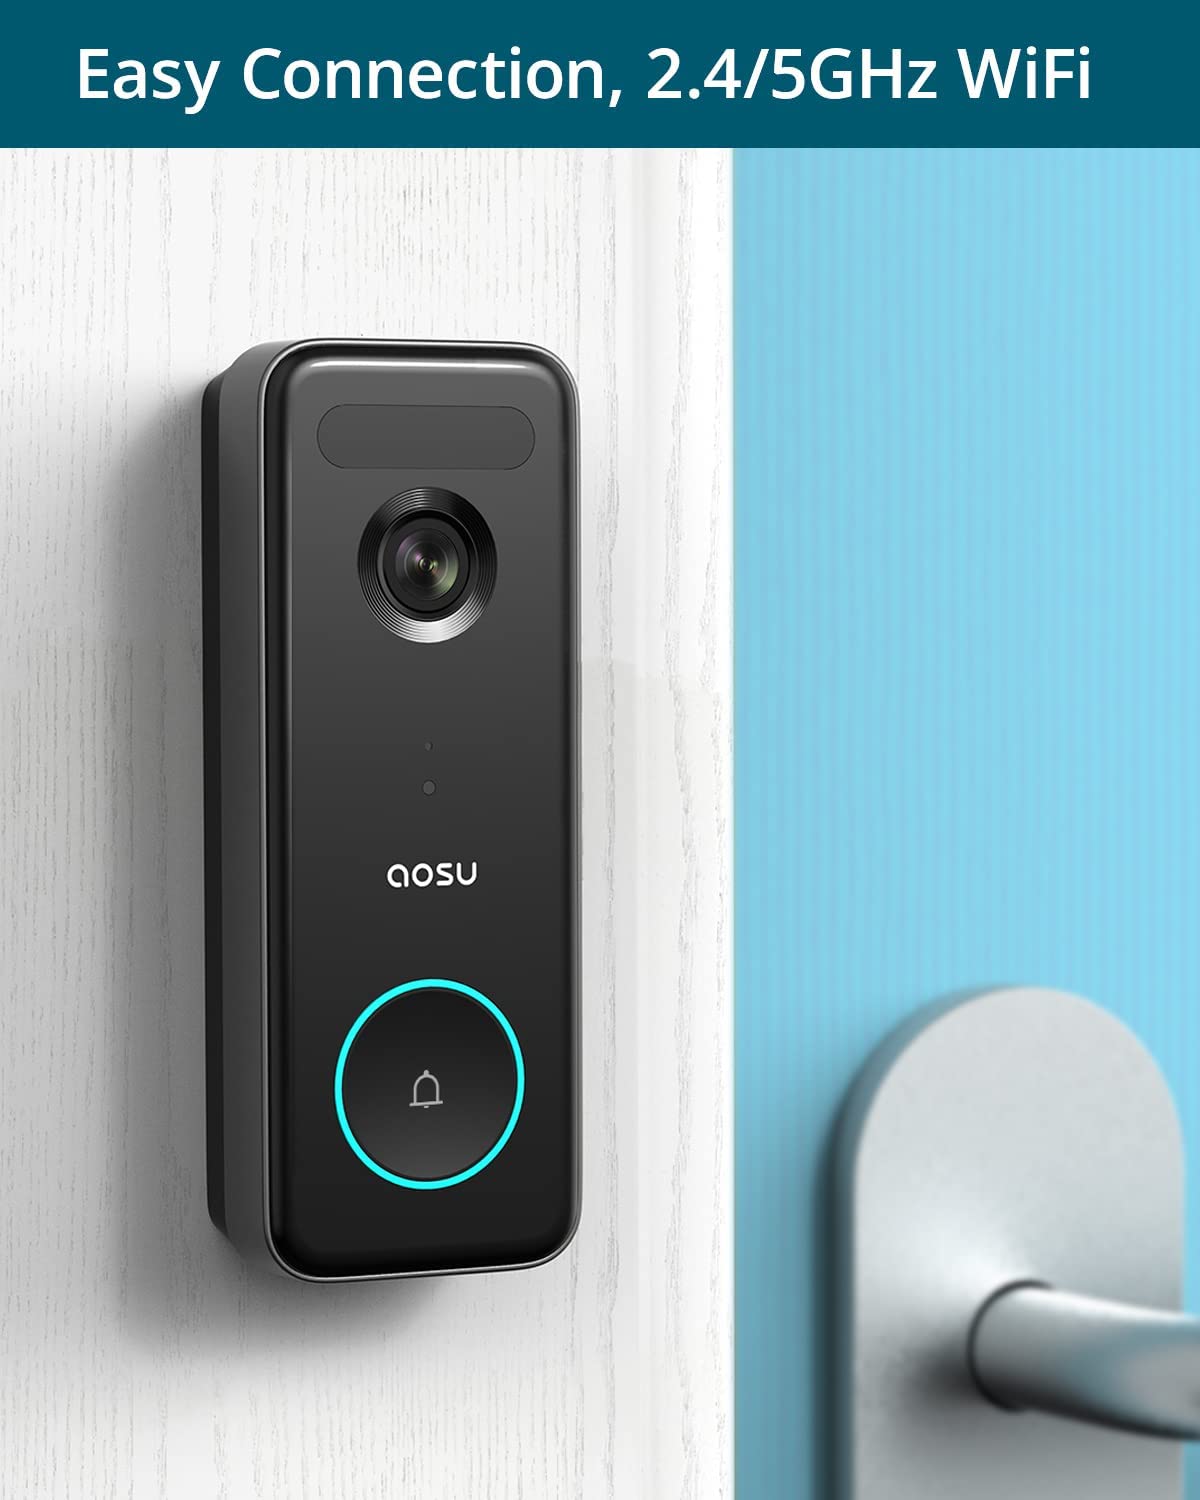 Wireless Video Doorbell Camera, 5MP Ultra HD,  Triple Motion Detection with Homebase, Work with Alexa & Google Assistant